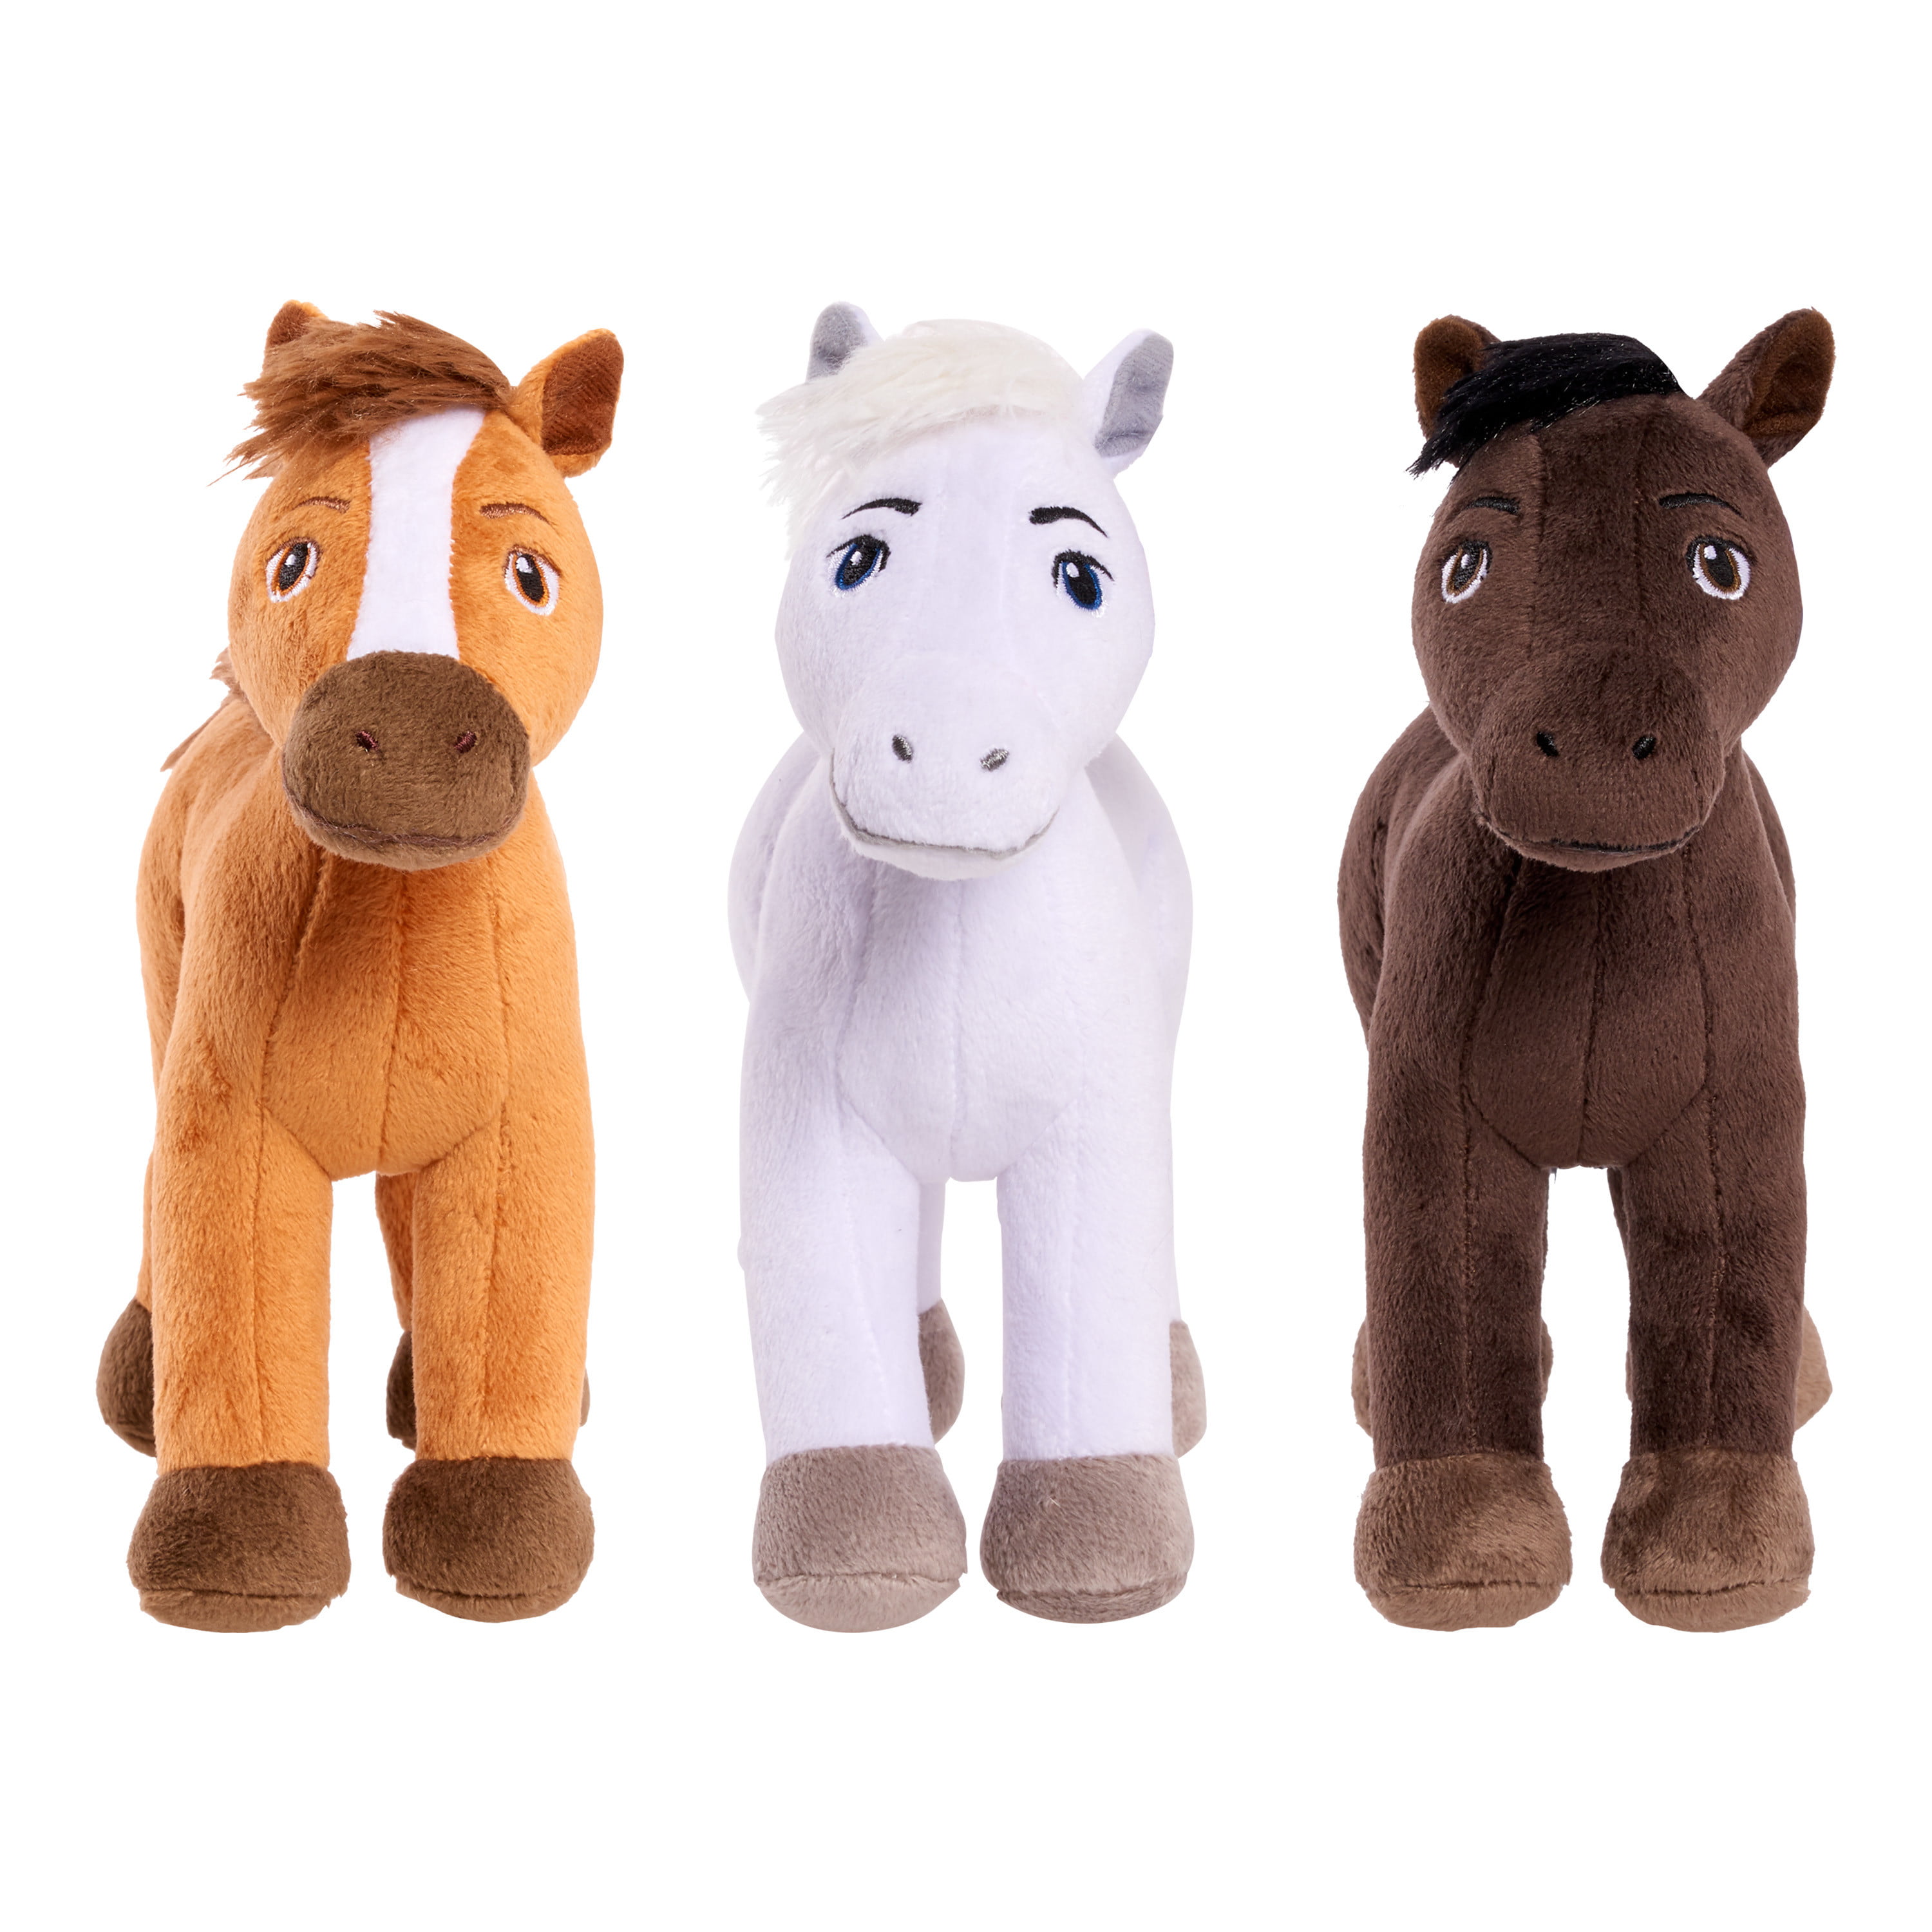 DreamWorks Spirit Riding Free Bean Plush 3-Pack, Kids Toys for Ages 3 Up,  Gifts and Presents 